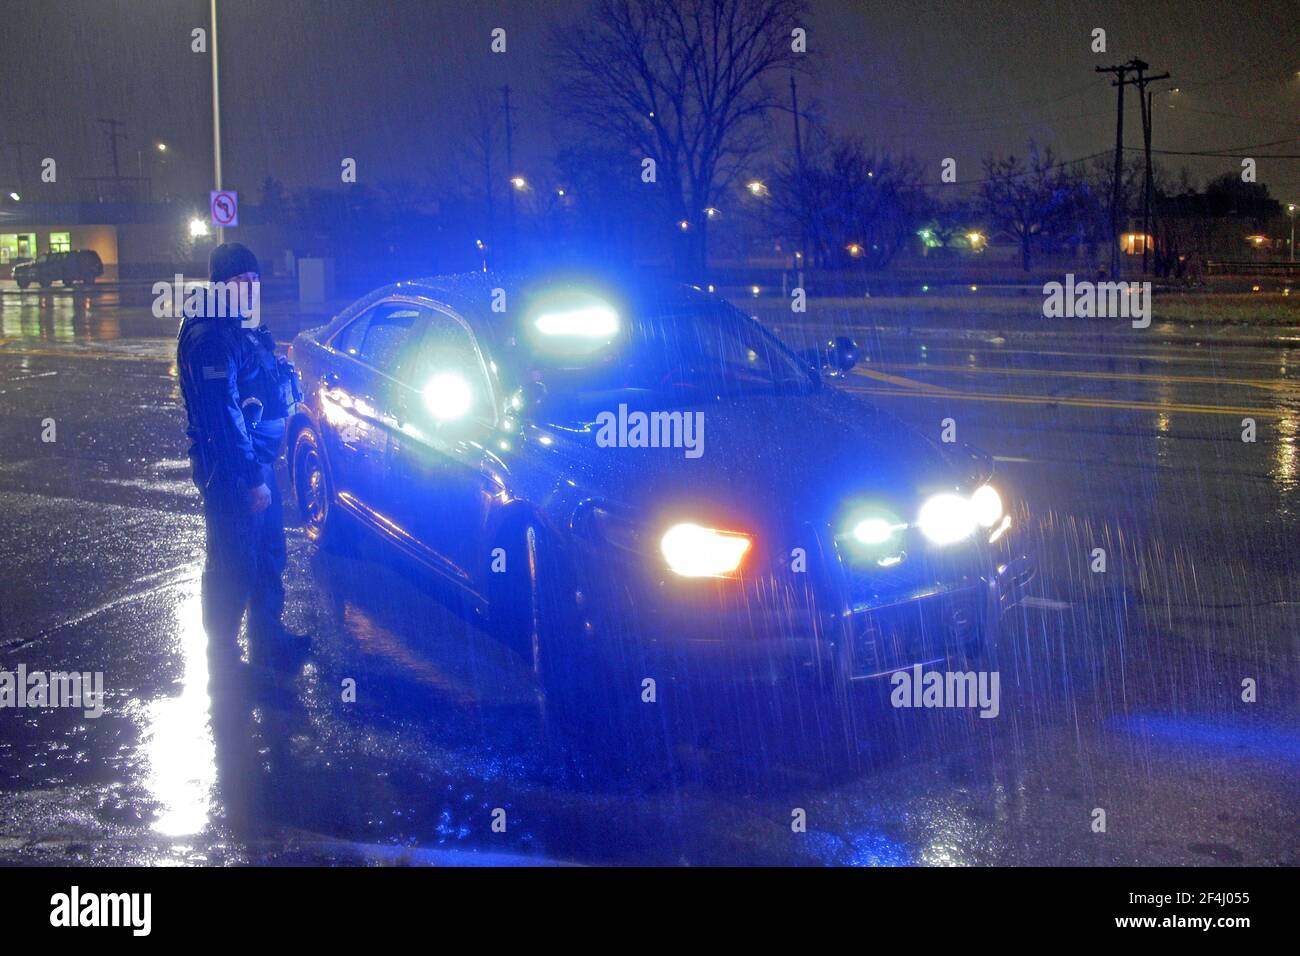 A Detroit police officer stands by his vehicle on a rainy night in Detroit, Michigan, USA Stock Photo